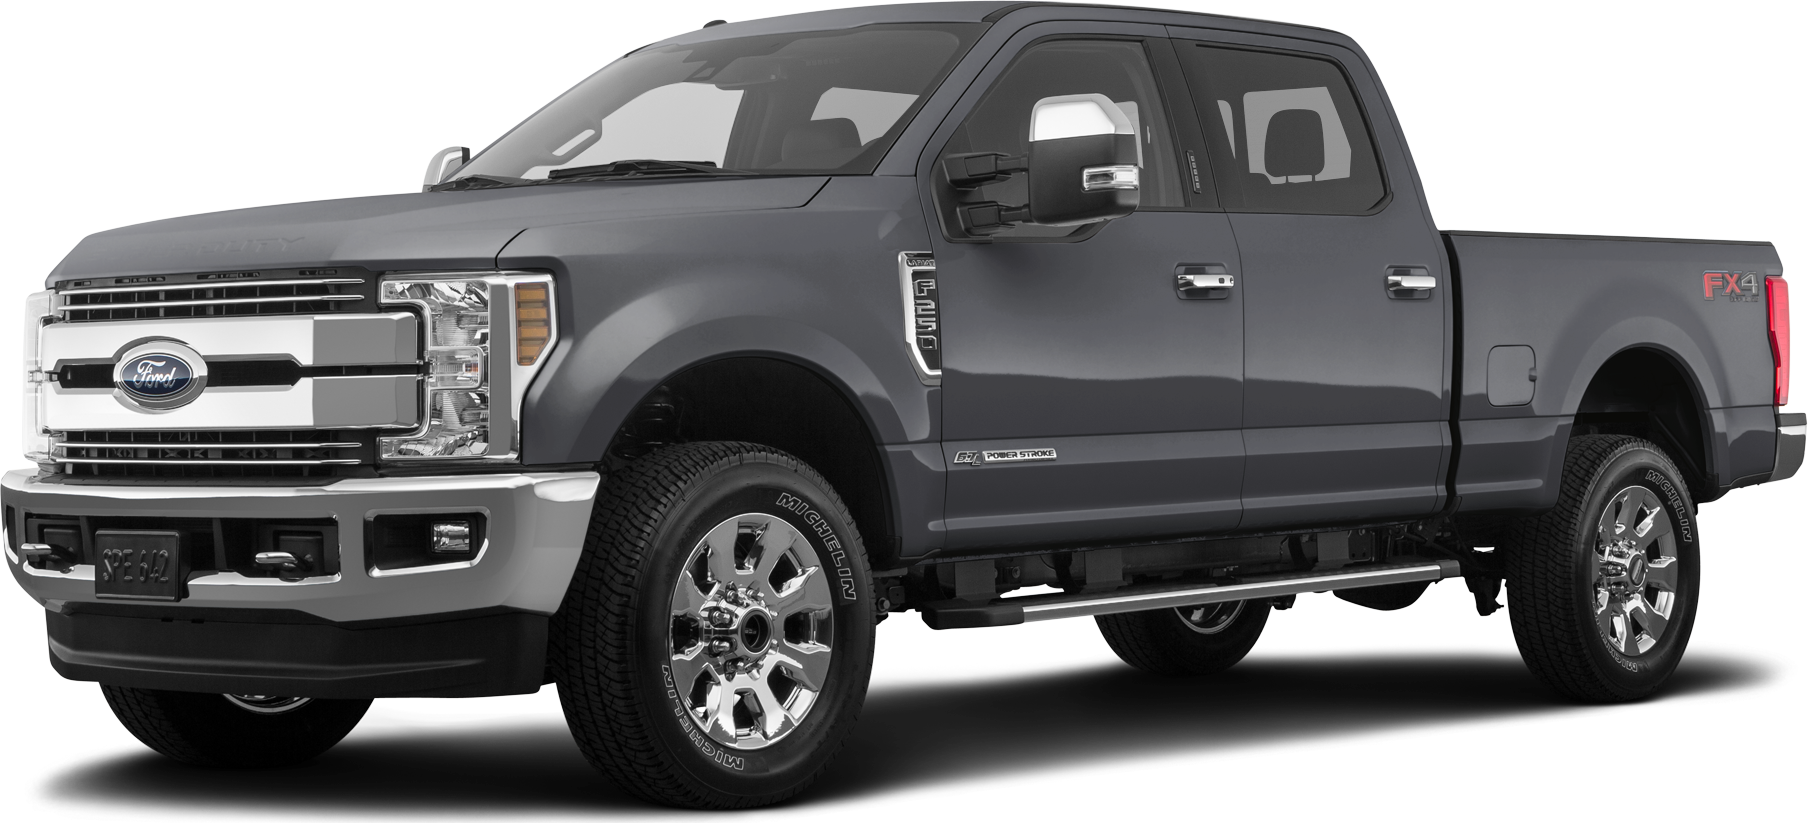 2018 Ford F250 Super Duty Crew Cab Price Value Ratings And Reviews